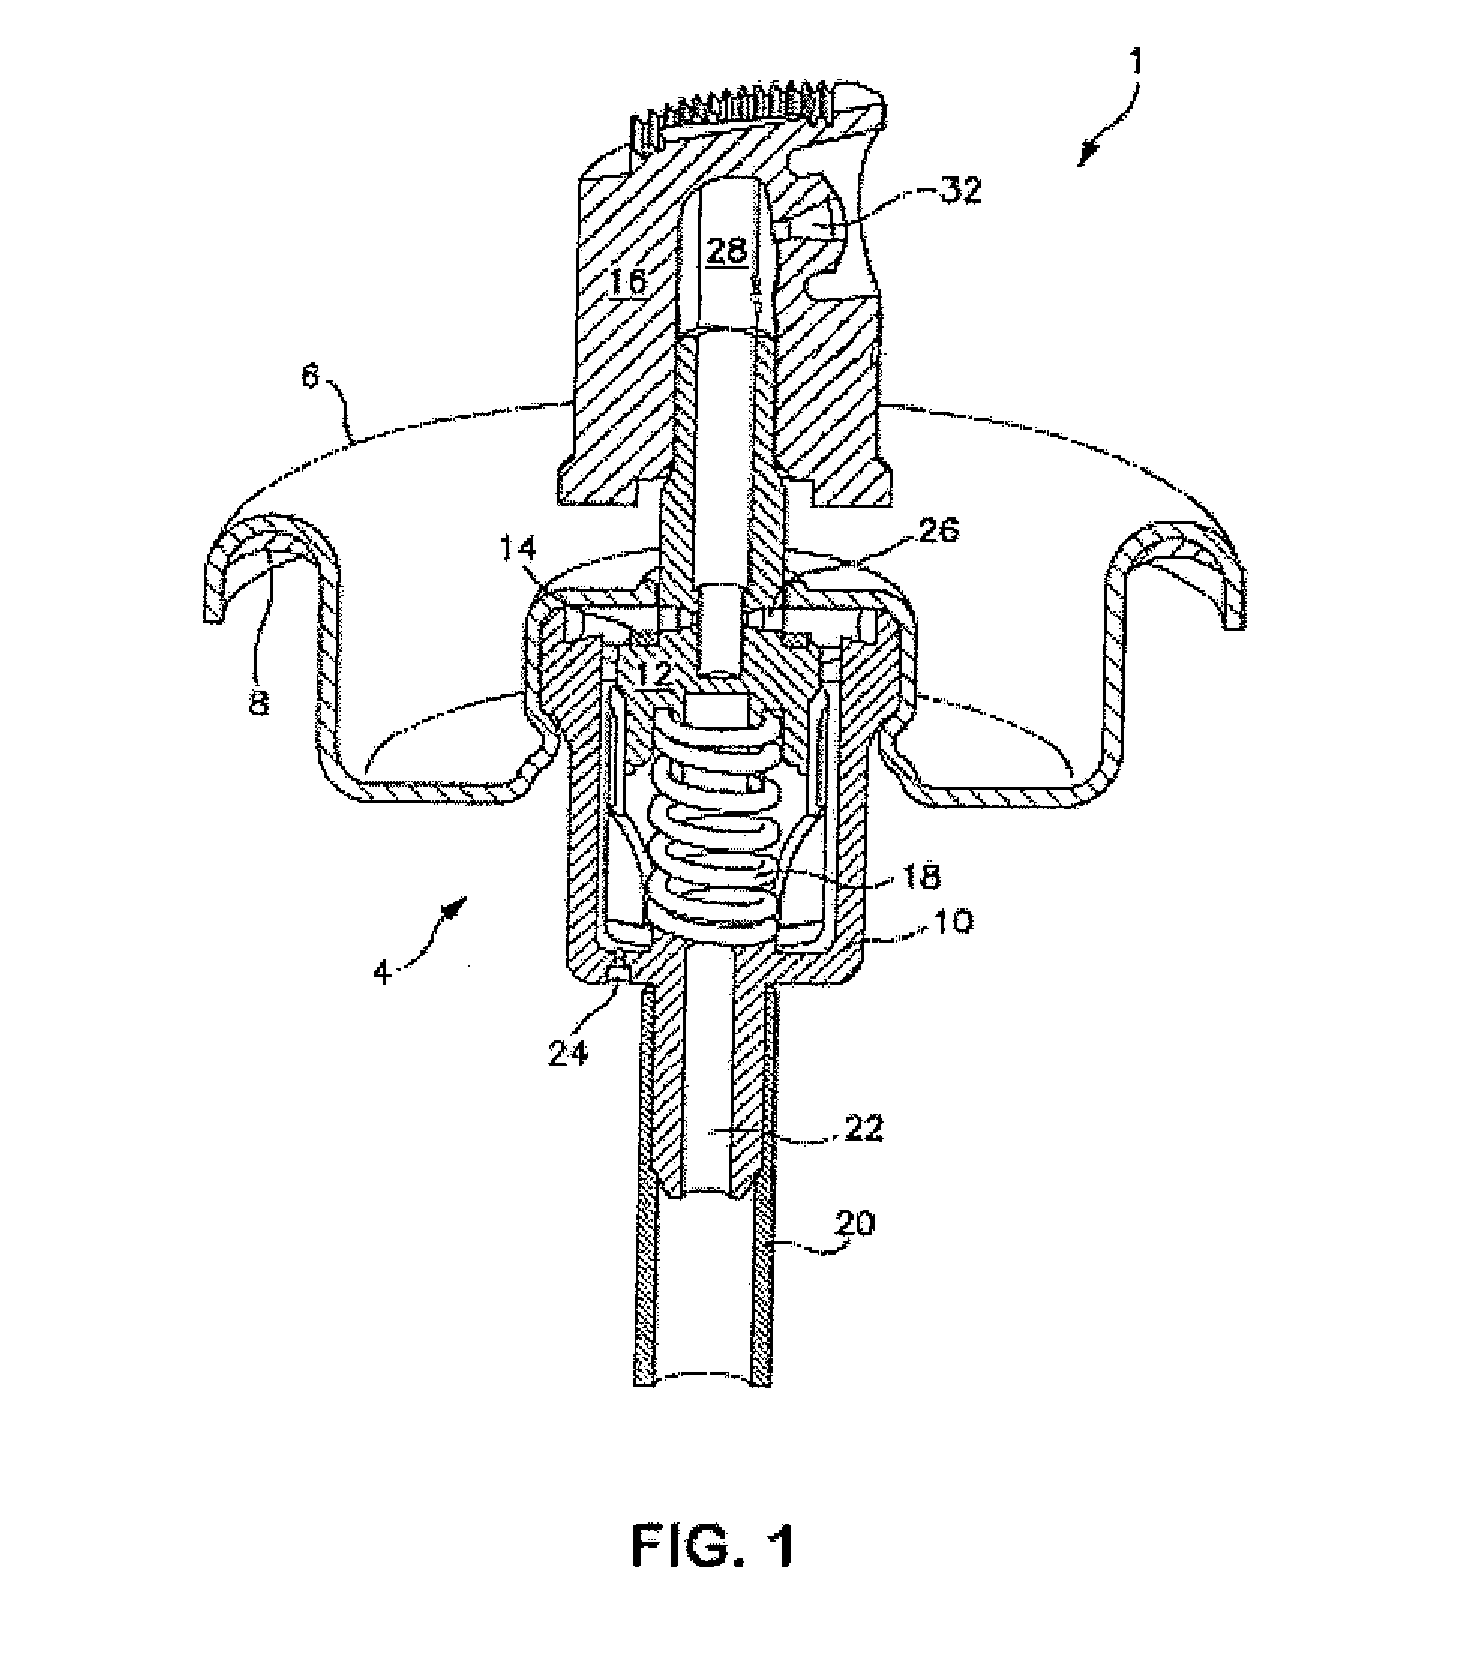 Composition and Aerosol Spray Dispenser for Eliminating Odors in Air